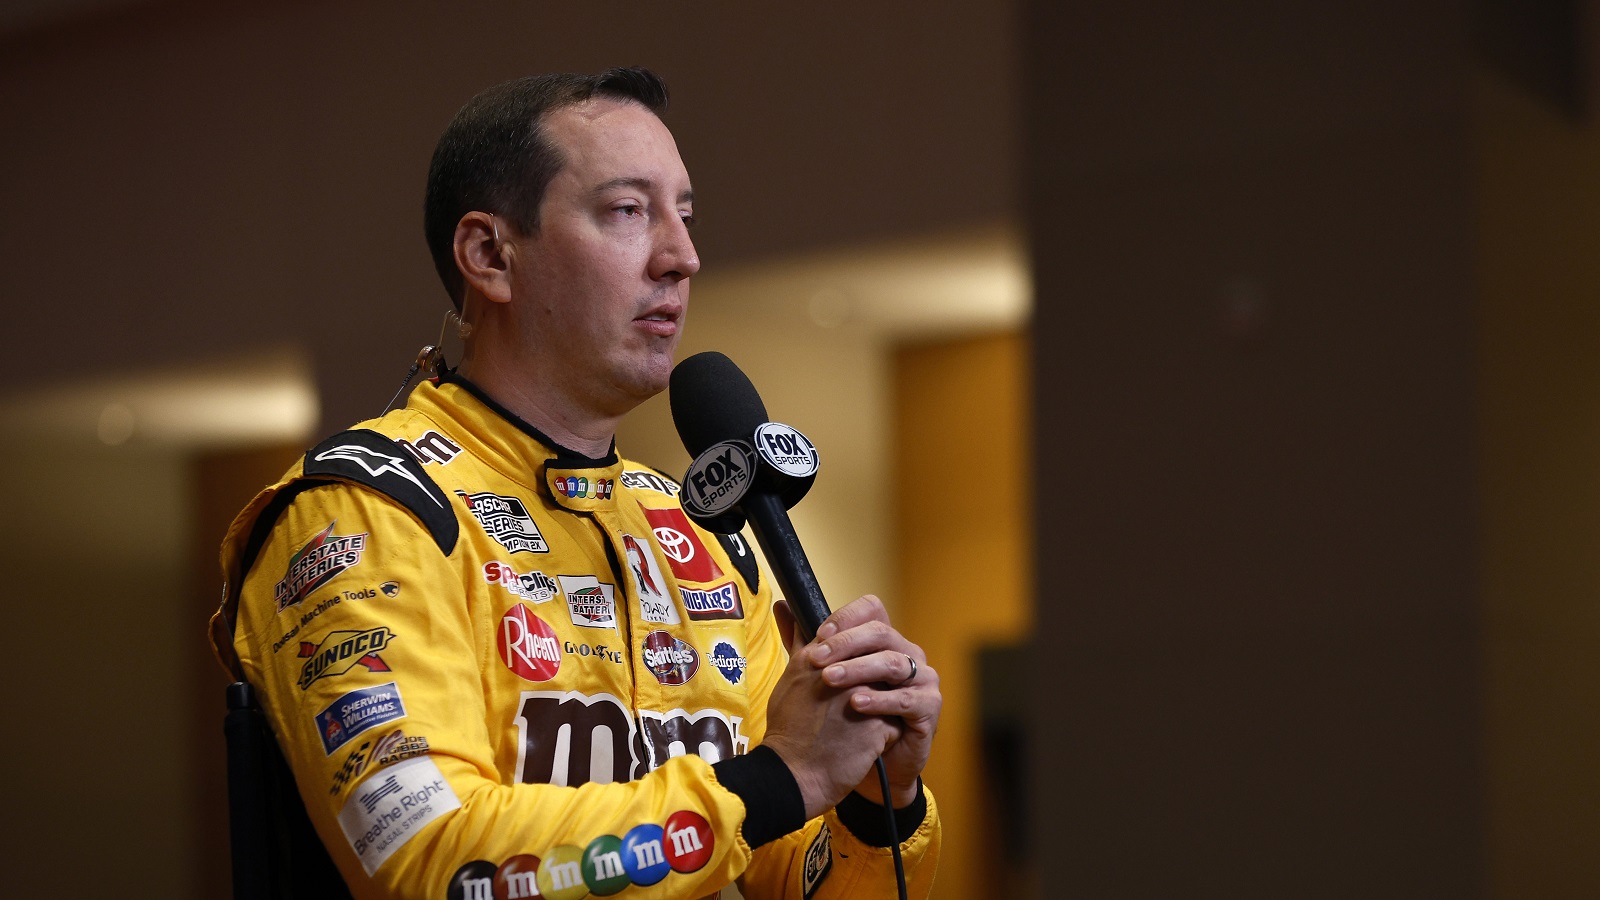 NASCAR driver Kyle Busch speaks with reporters during the NASCAR Cup Series Playoff Media Day at Charlotte Convention Center on Sept. 1, 2022. | Getty Images